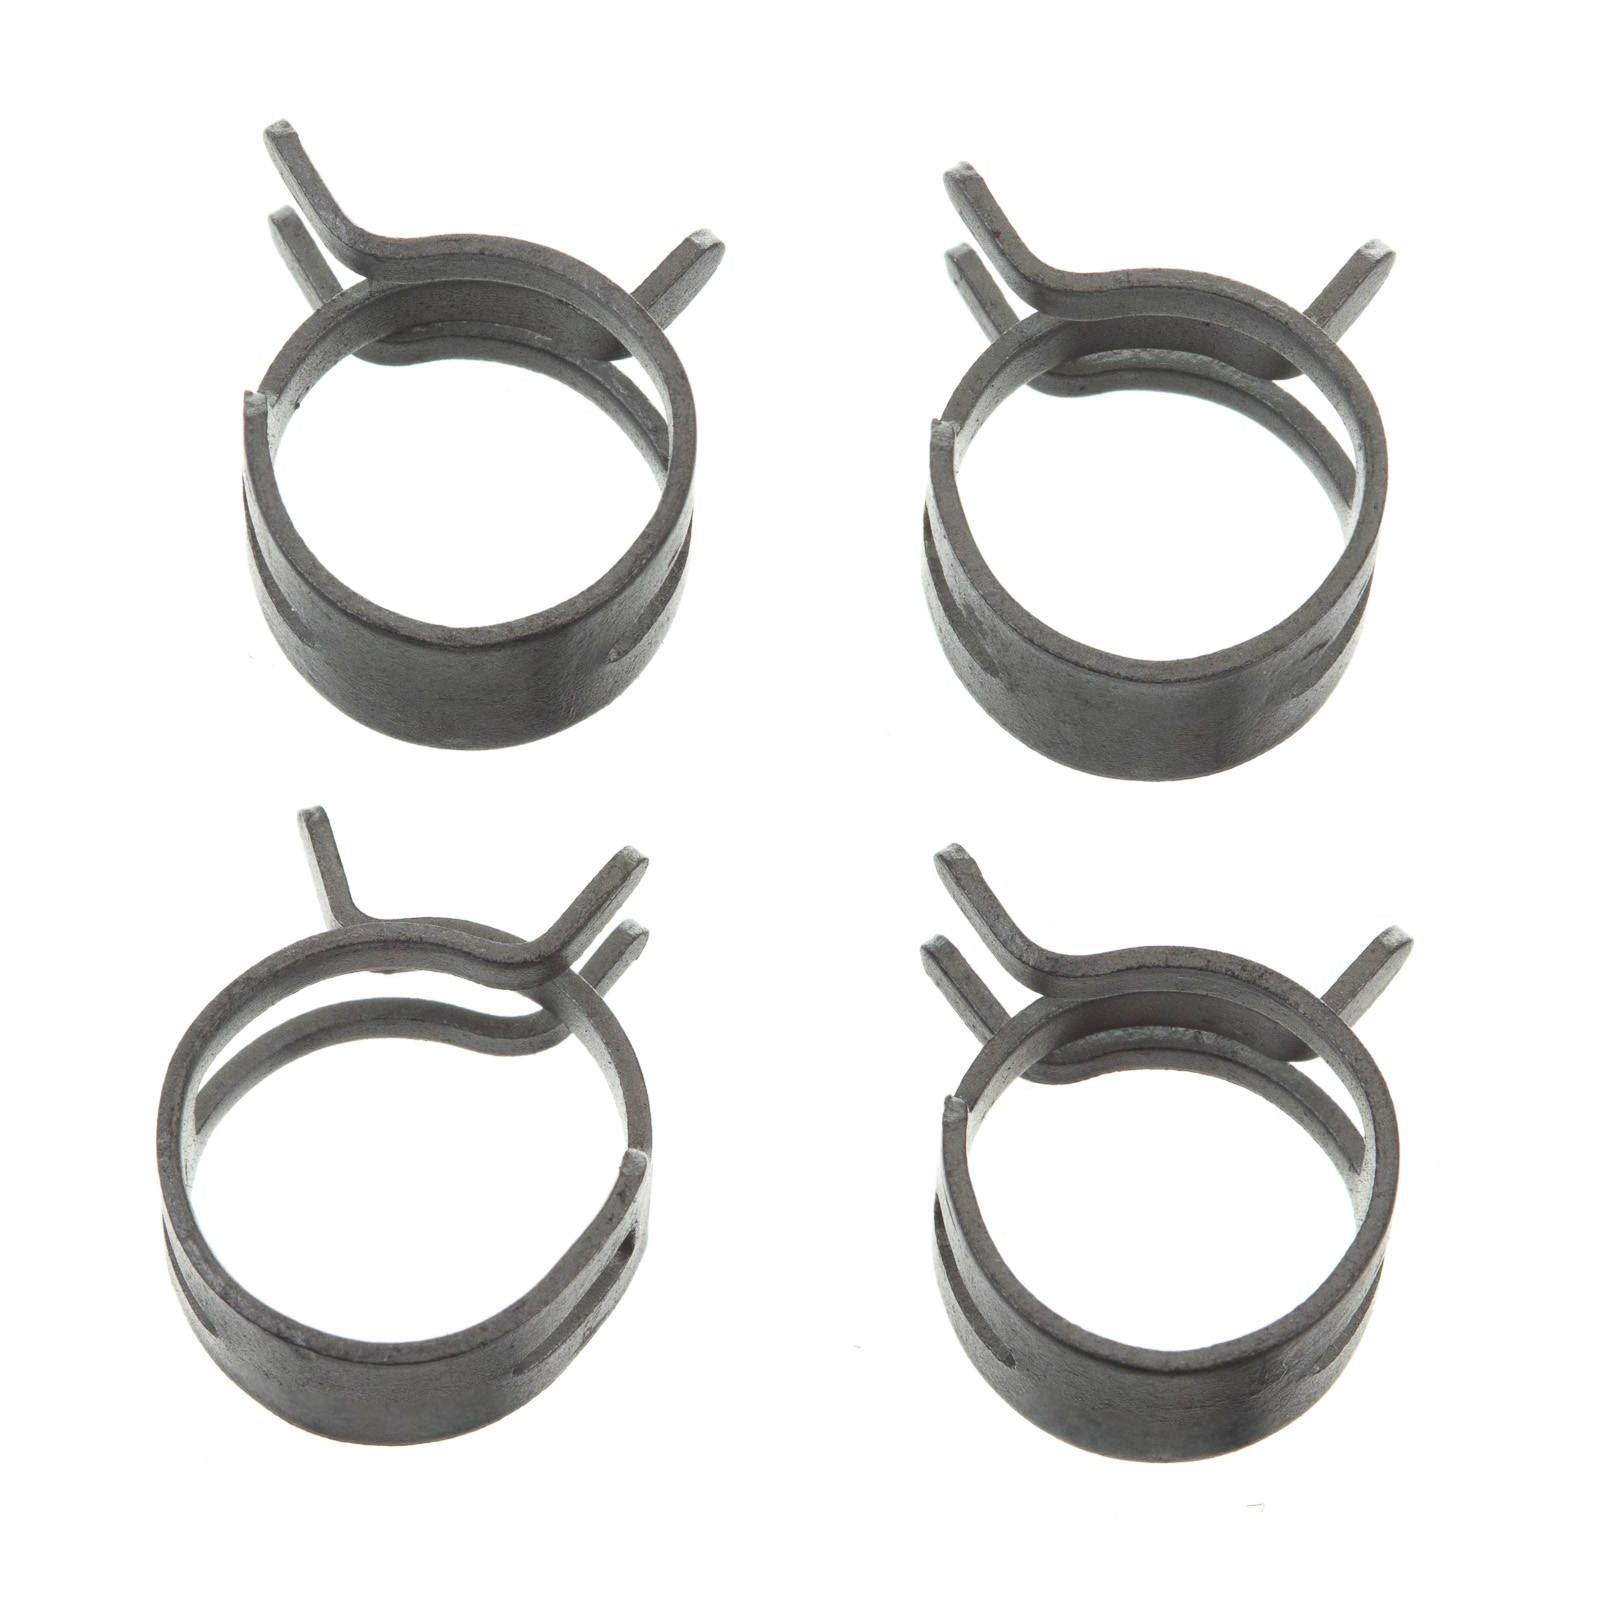 New ALL BALLS Racing Fuel Hose Clamp Kit - 11mm Band (4 Pack) #ABFS00063